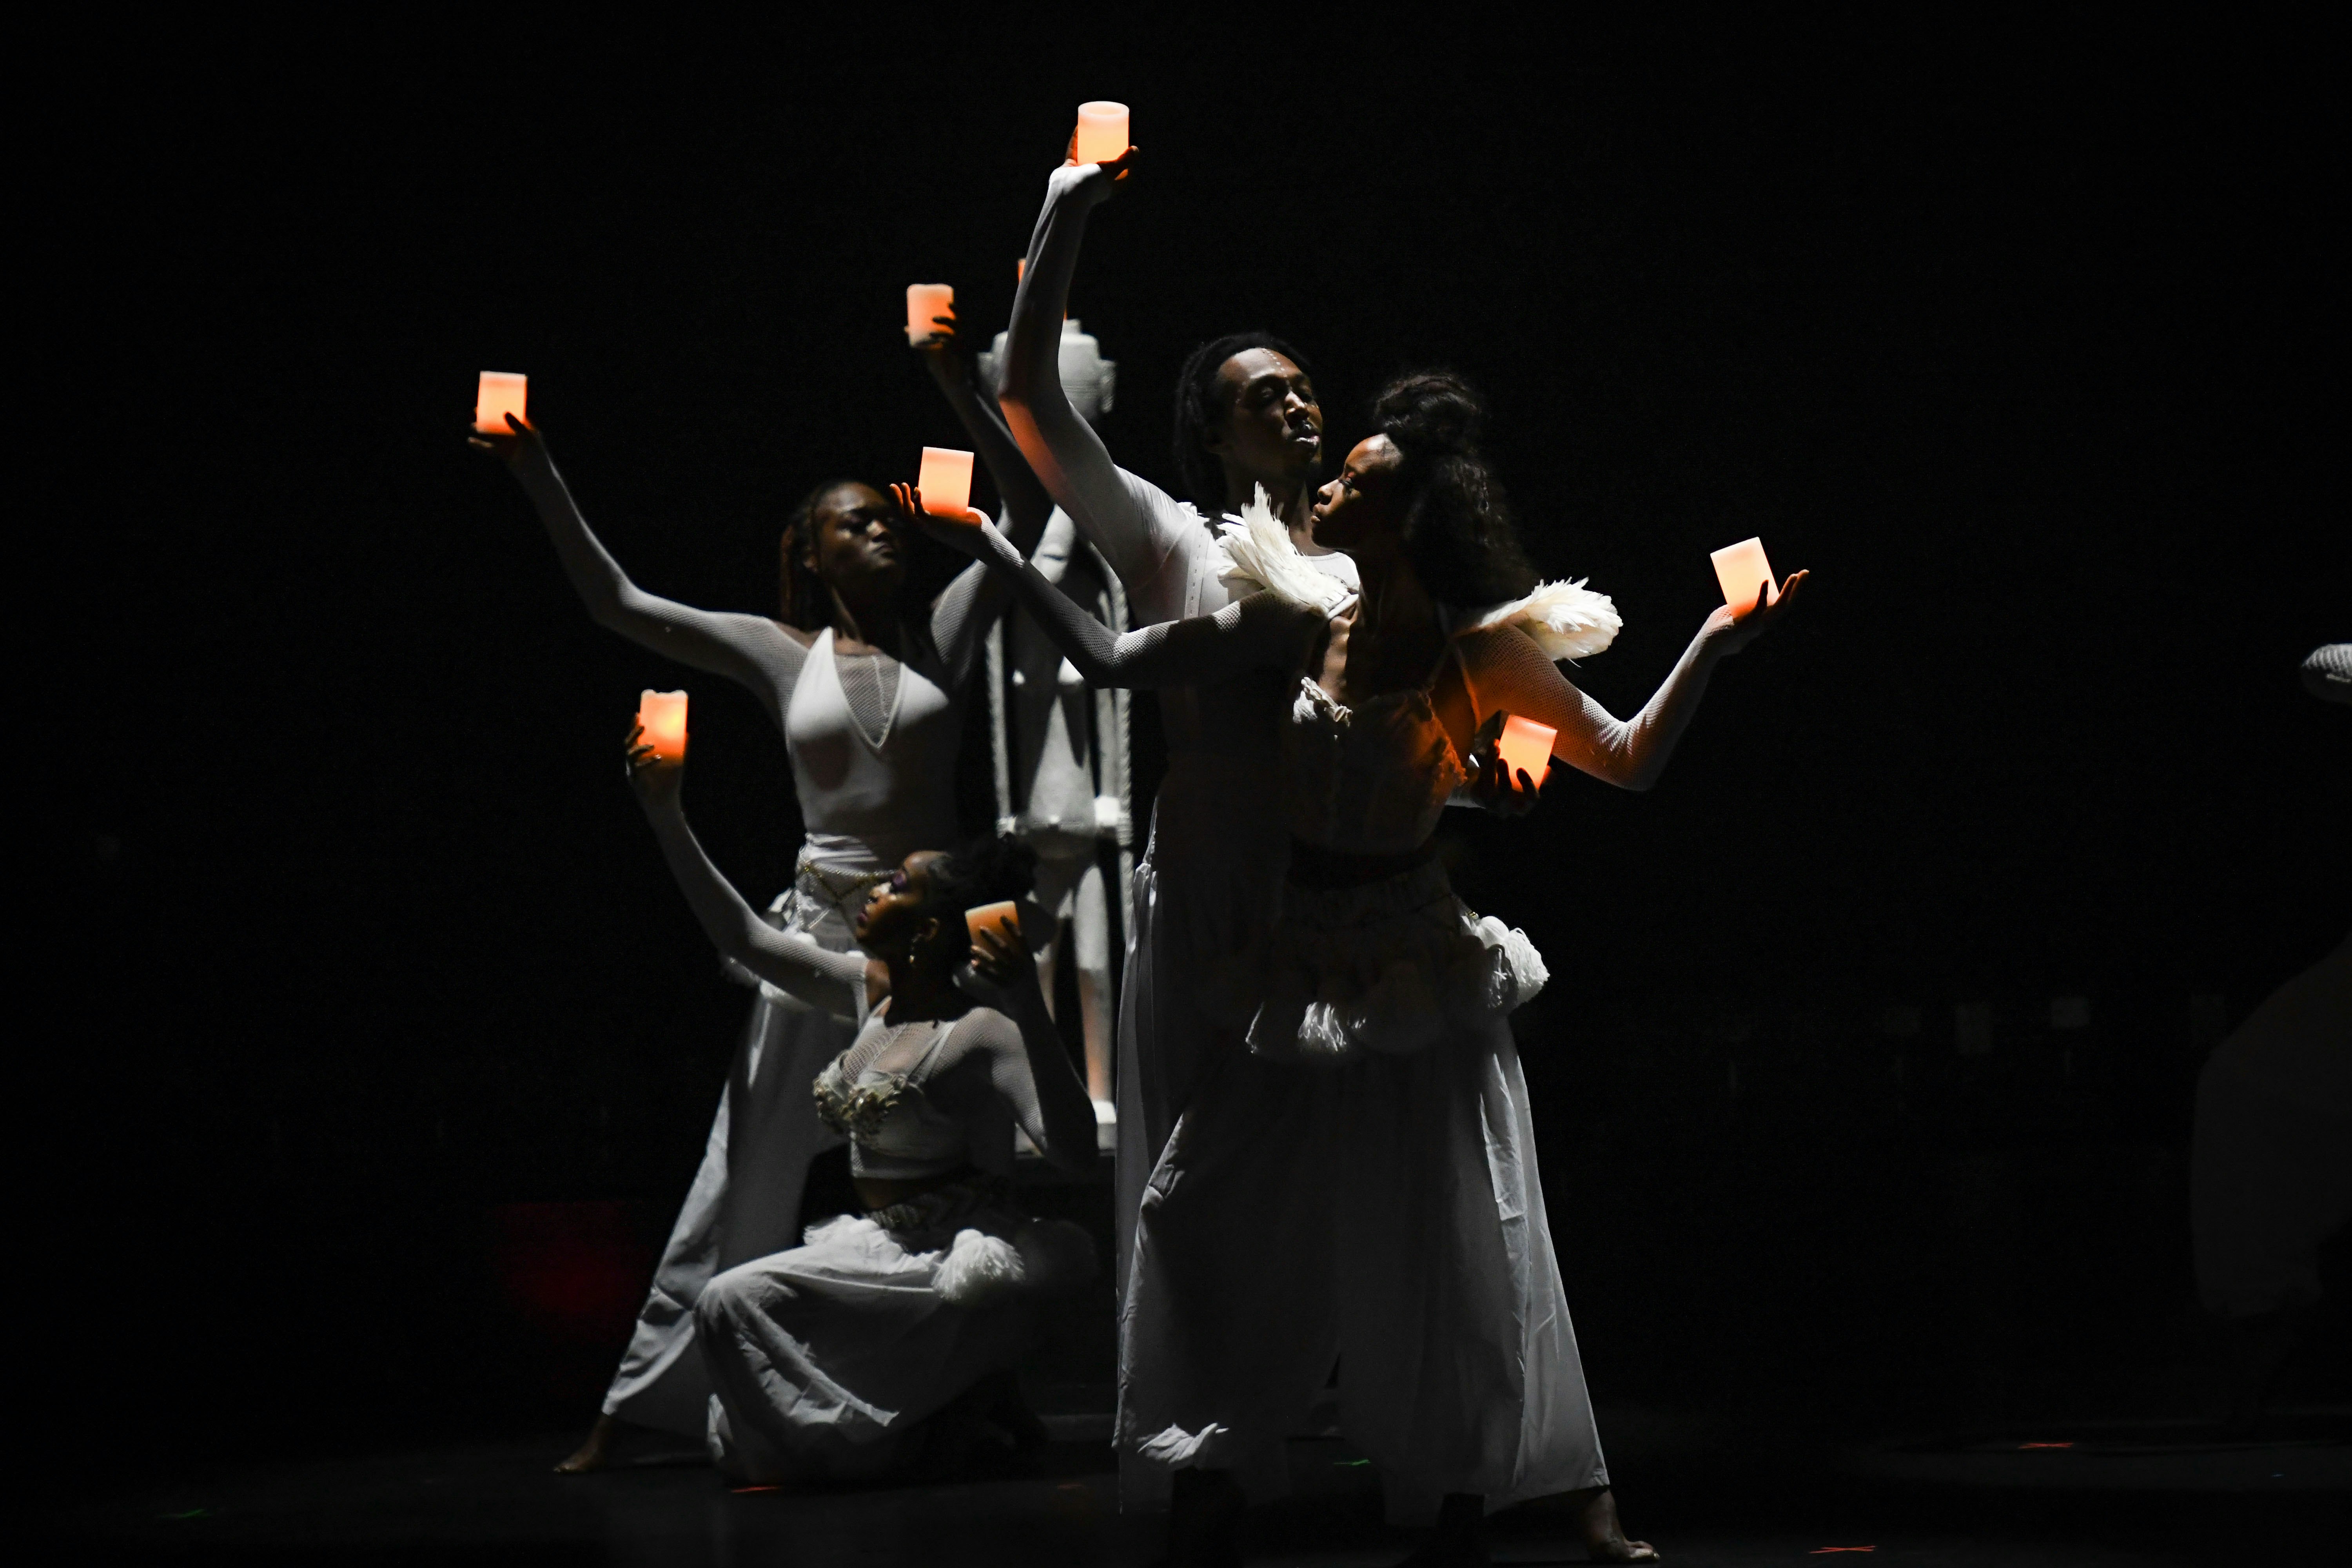 Black dancers dressed in white, posed in front of a dark backdrop and holding candles aloft